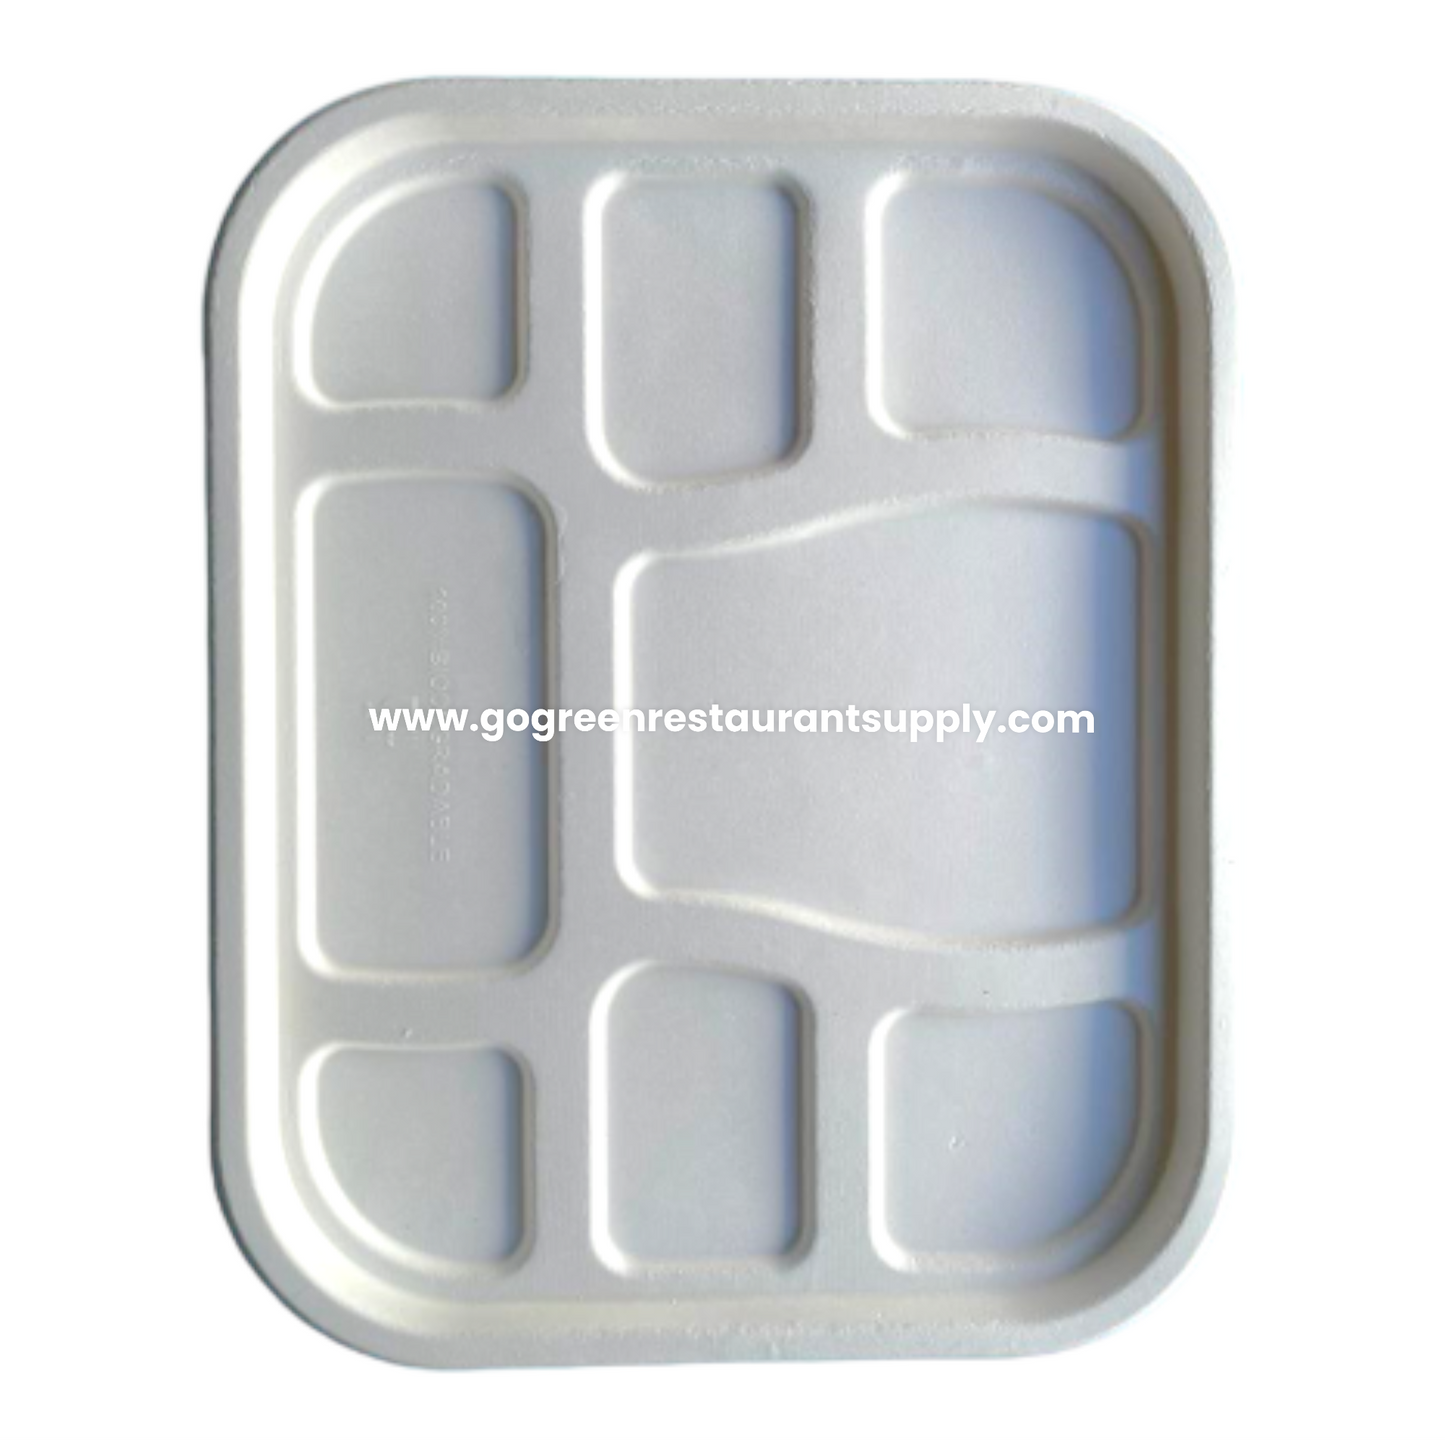 11.20"X 9" 8CP GO GREEN MEAL TRAY & LID - COUNT 500